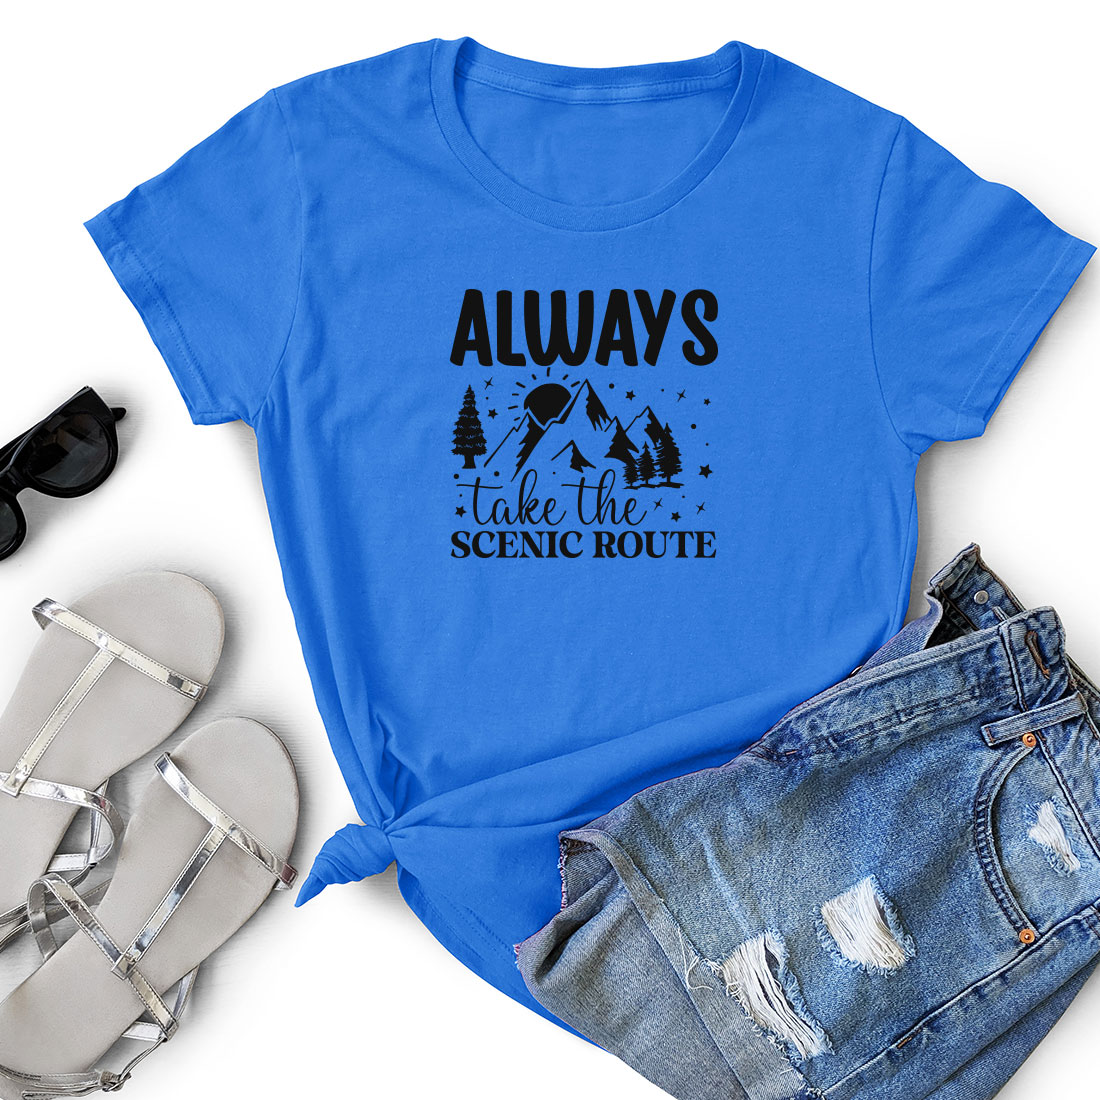 T - shirt that says always take the scenic route.